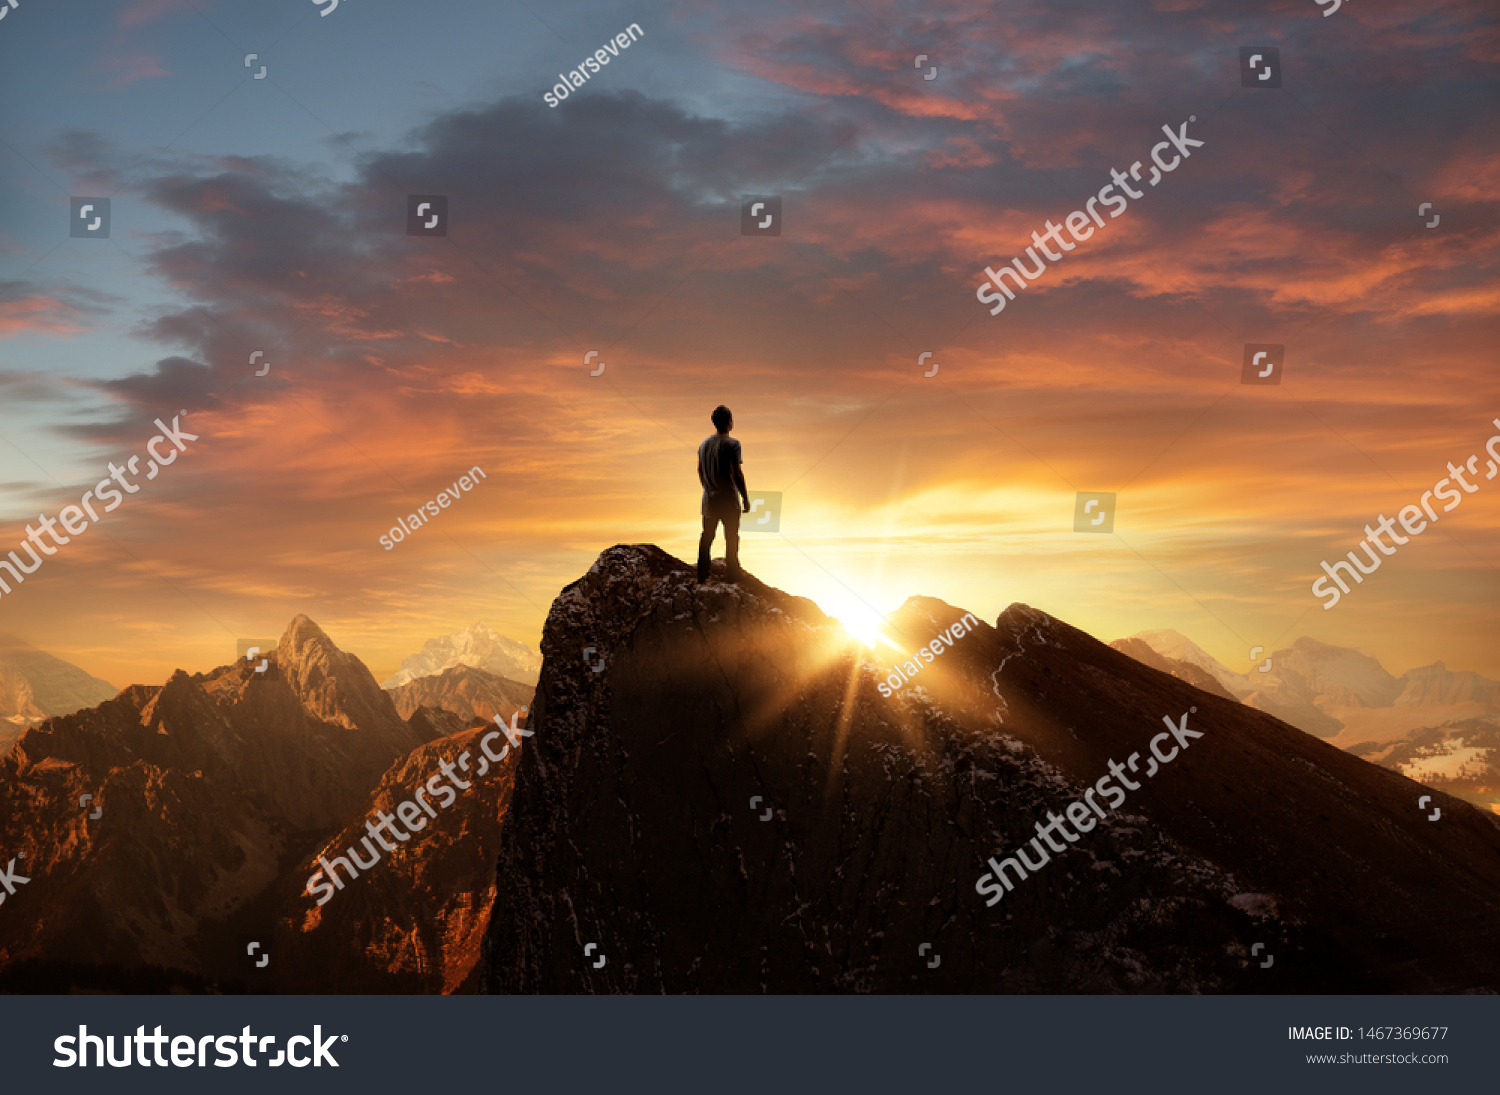 A man standing on top of a mountain as the sun sets. Goals and achievements concept photo composite. #1467369677